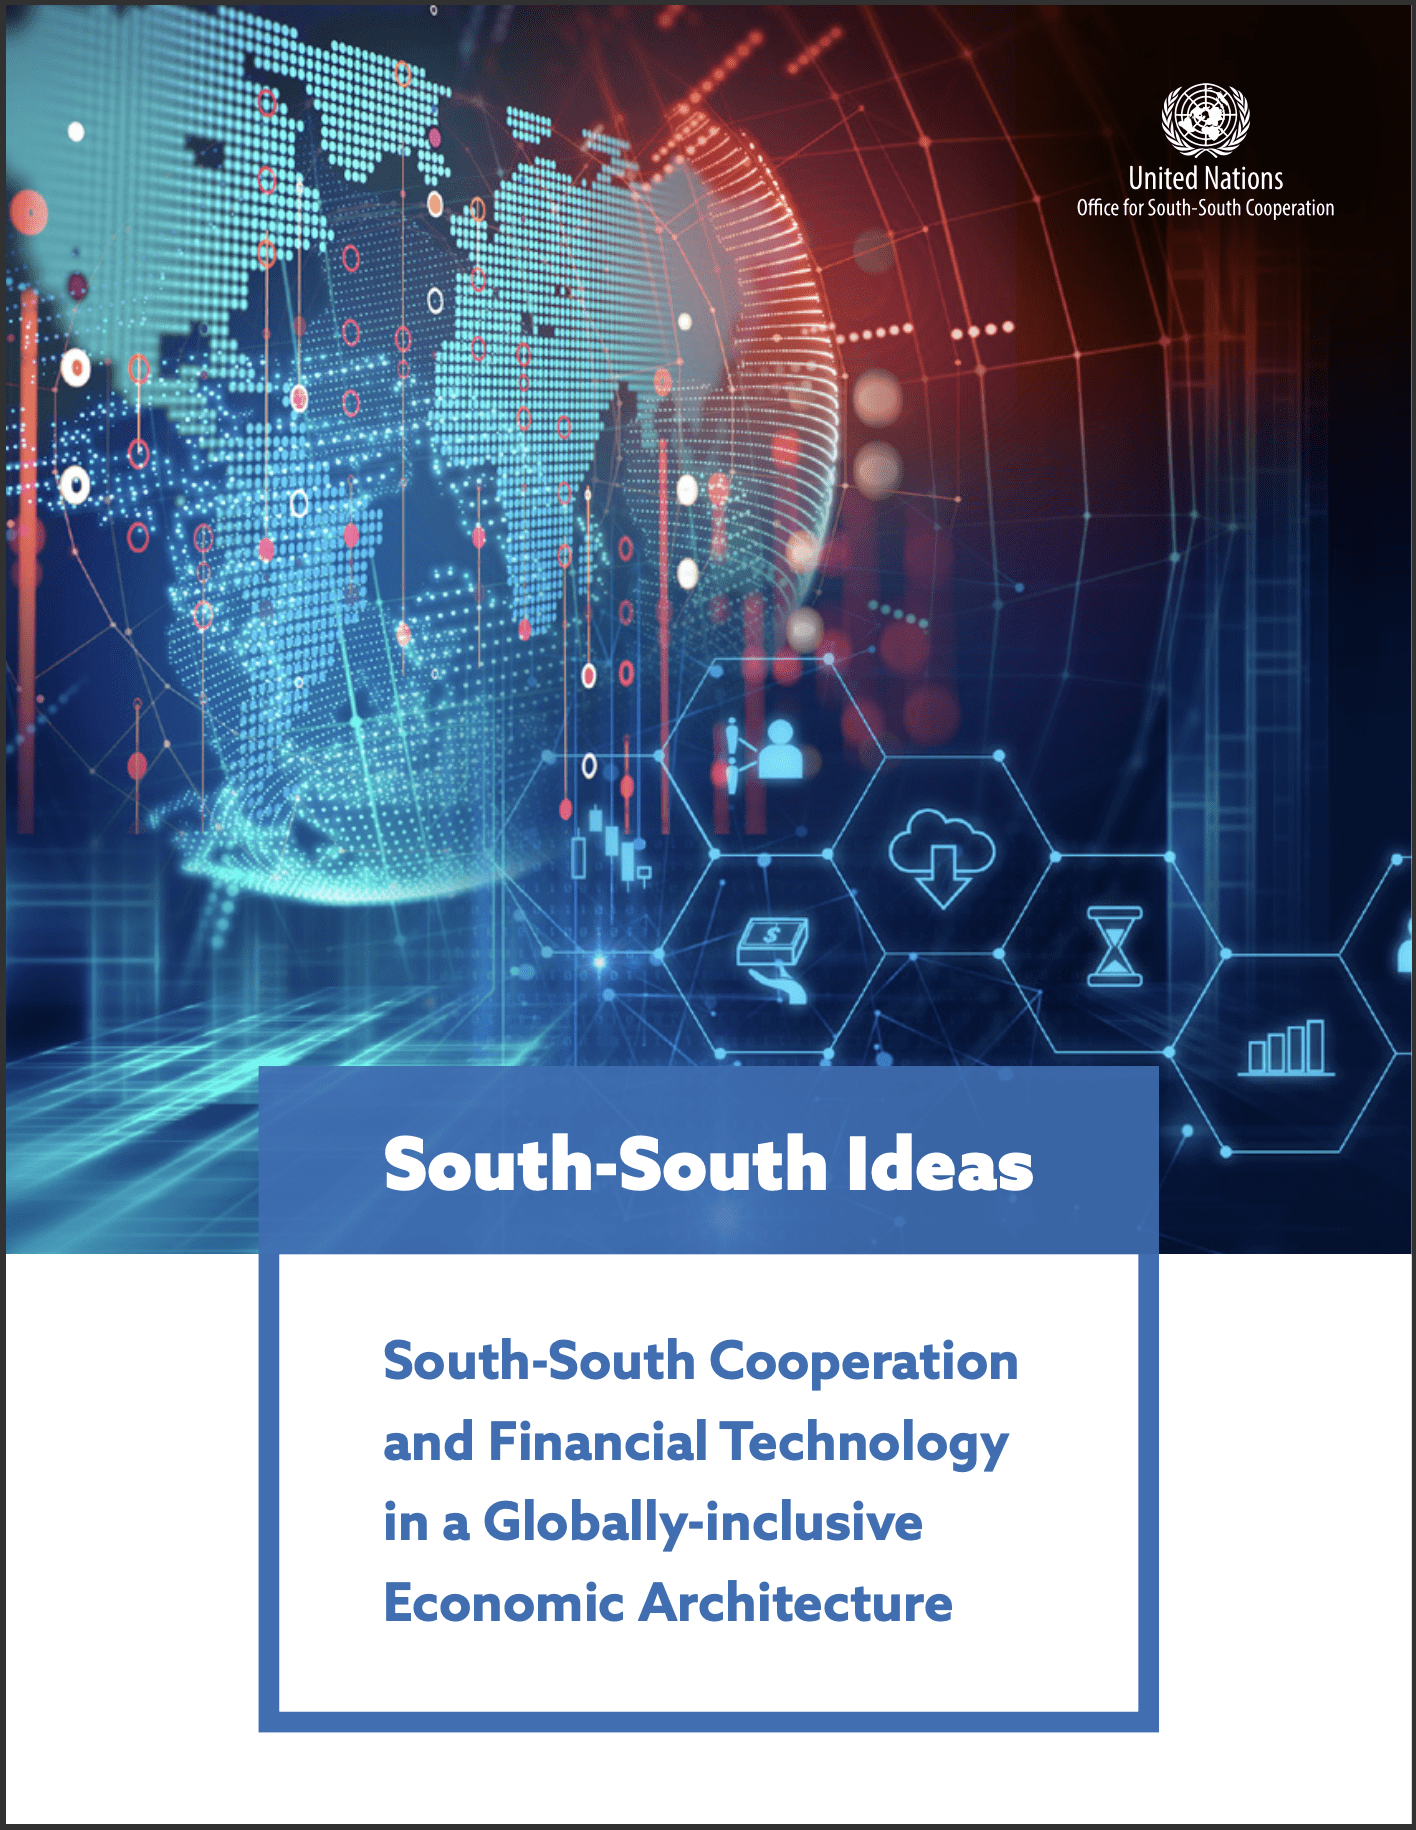 South-South Ideas: South-South Cooperation and Financial Technology in a Globally-inclusive Economic Architecture